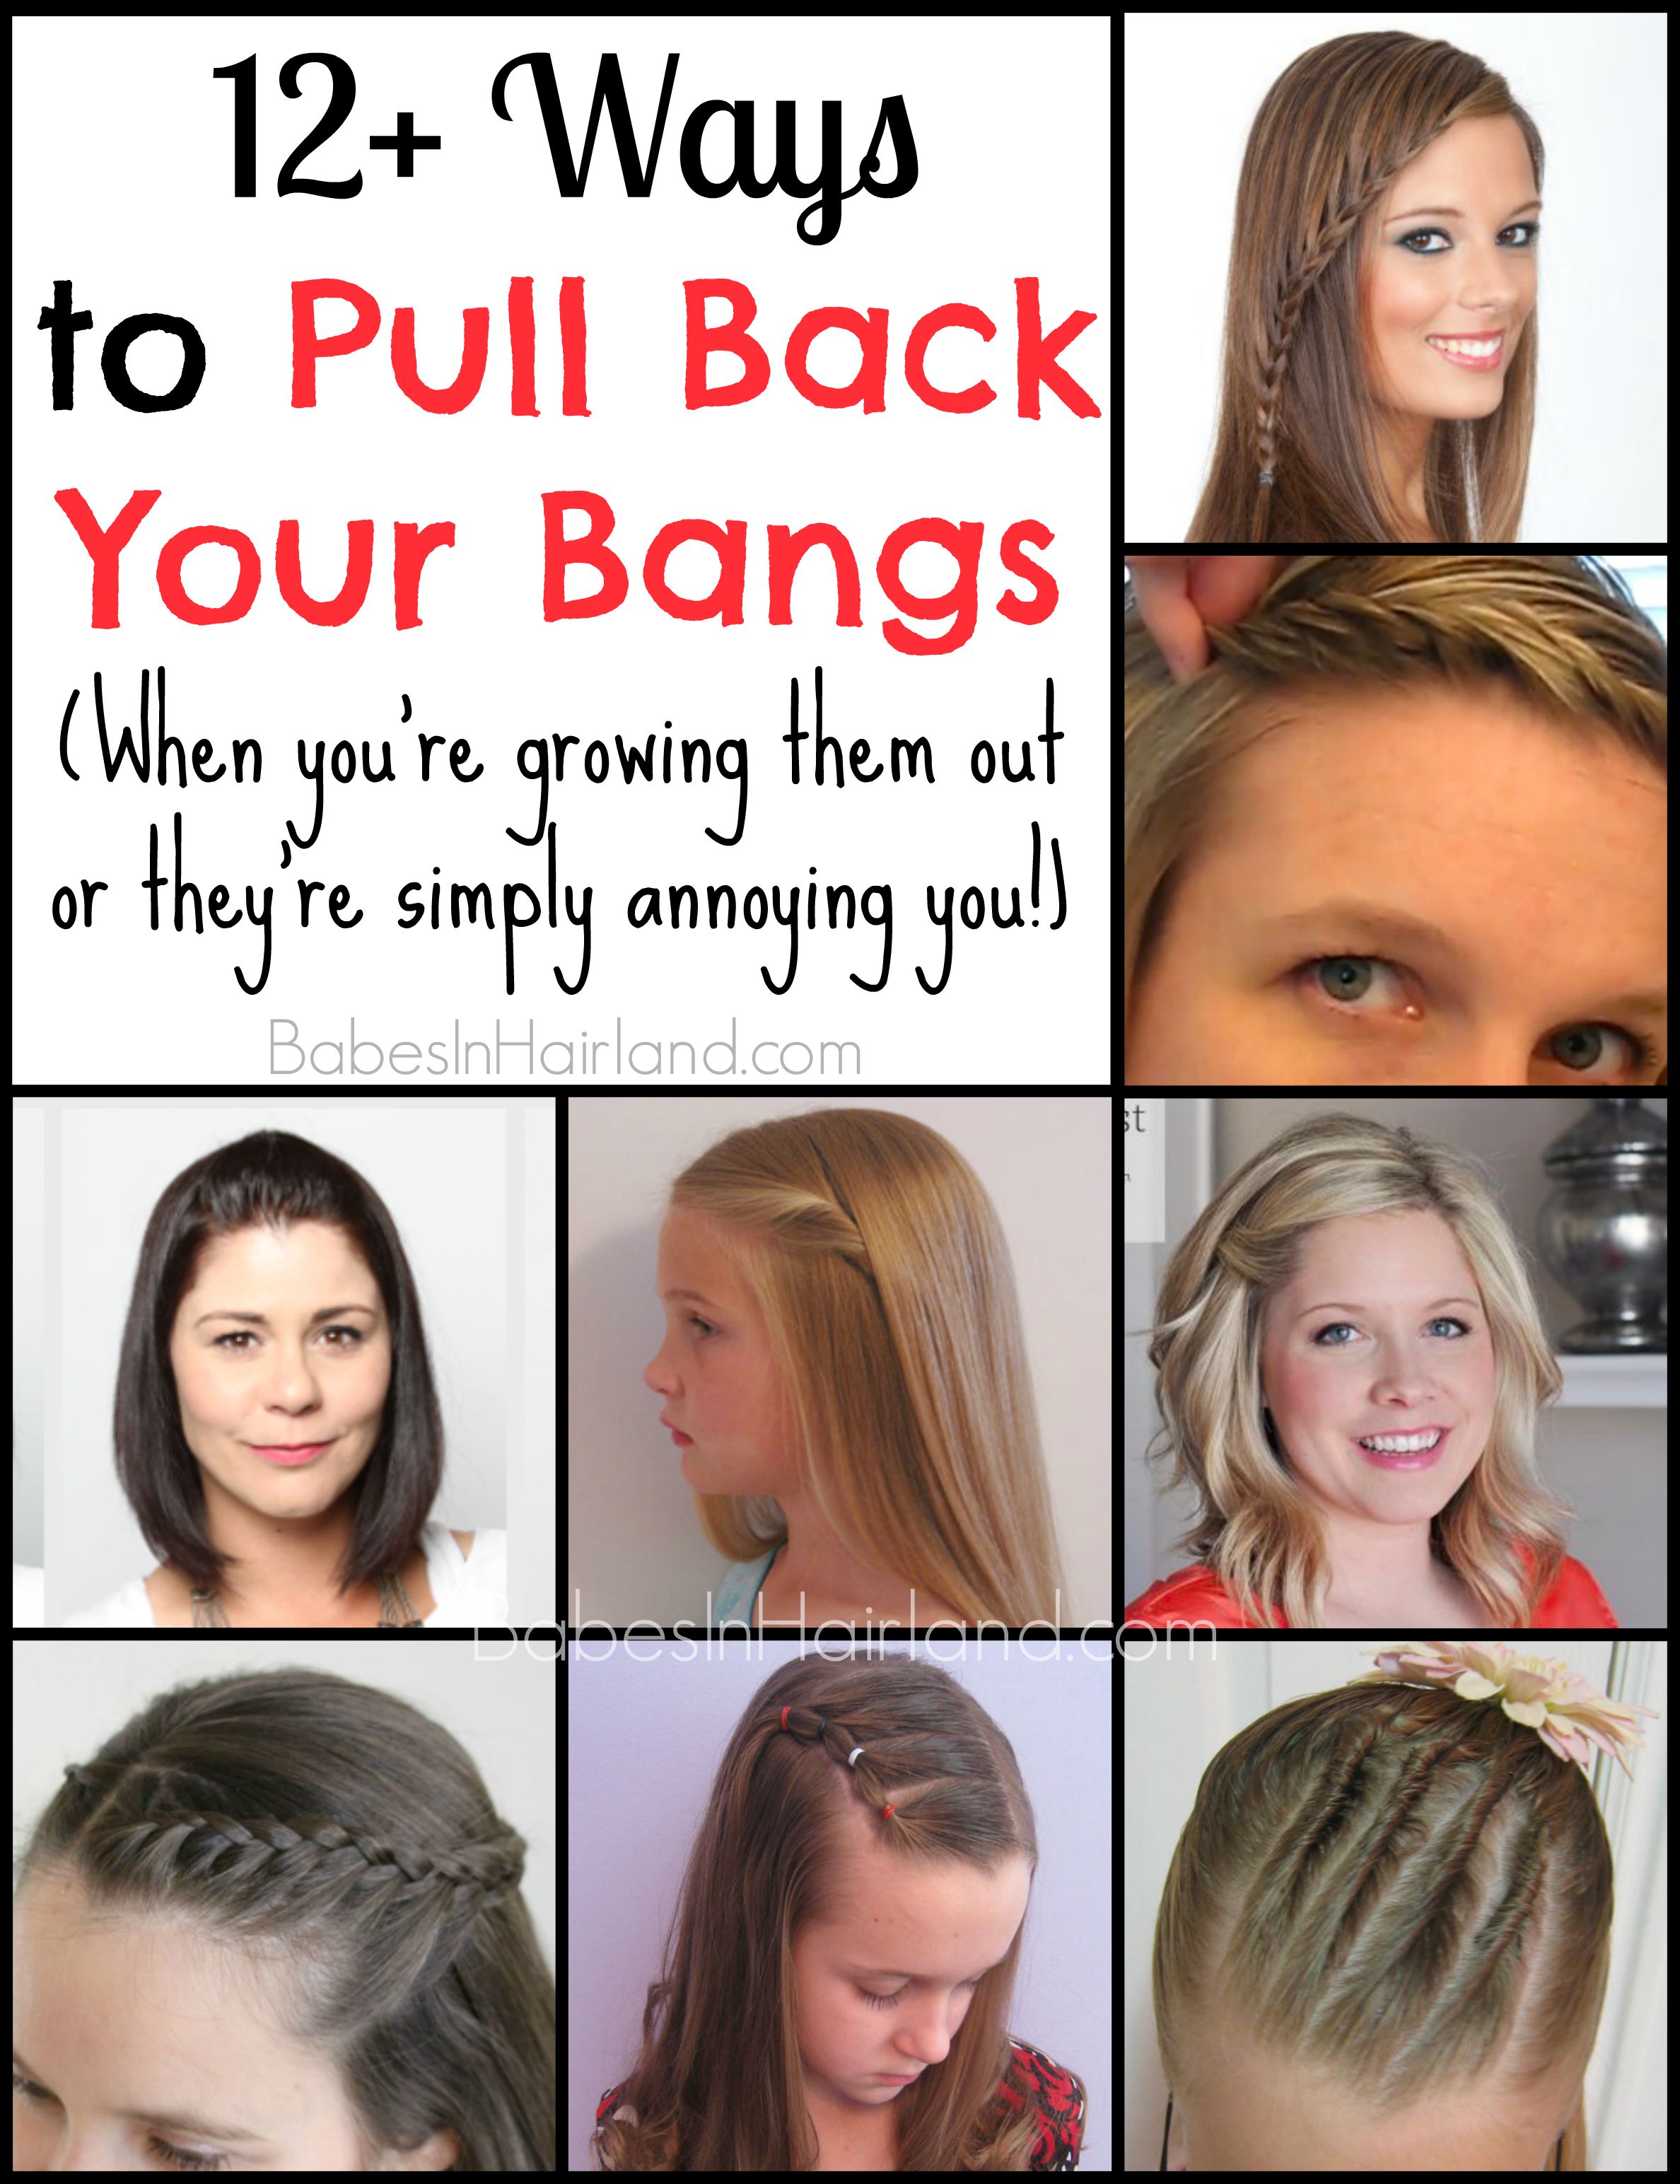 12+ Ways to Pull Back Your Bangs - Babes In Hairland